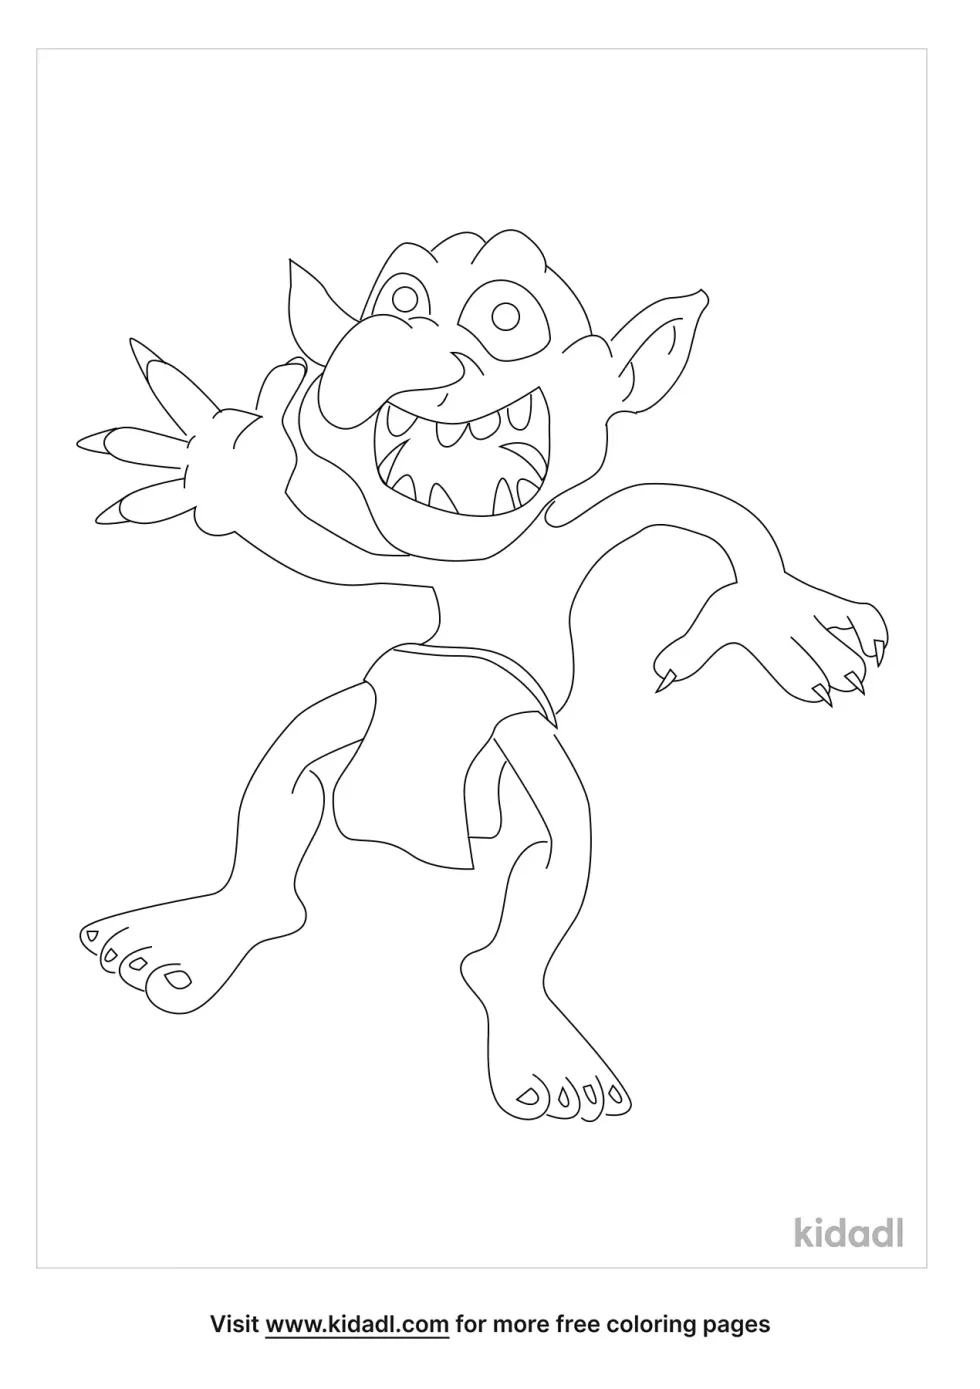 Sharp Tooth Goblin Coloring Page